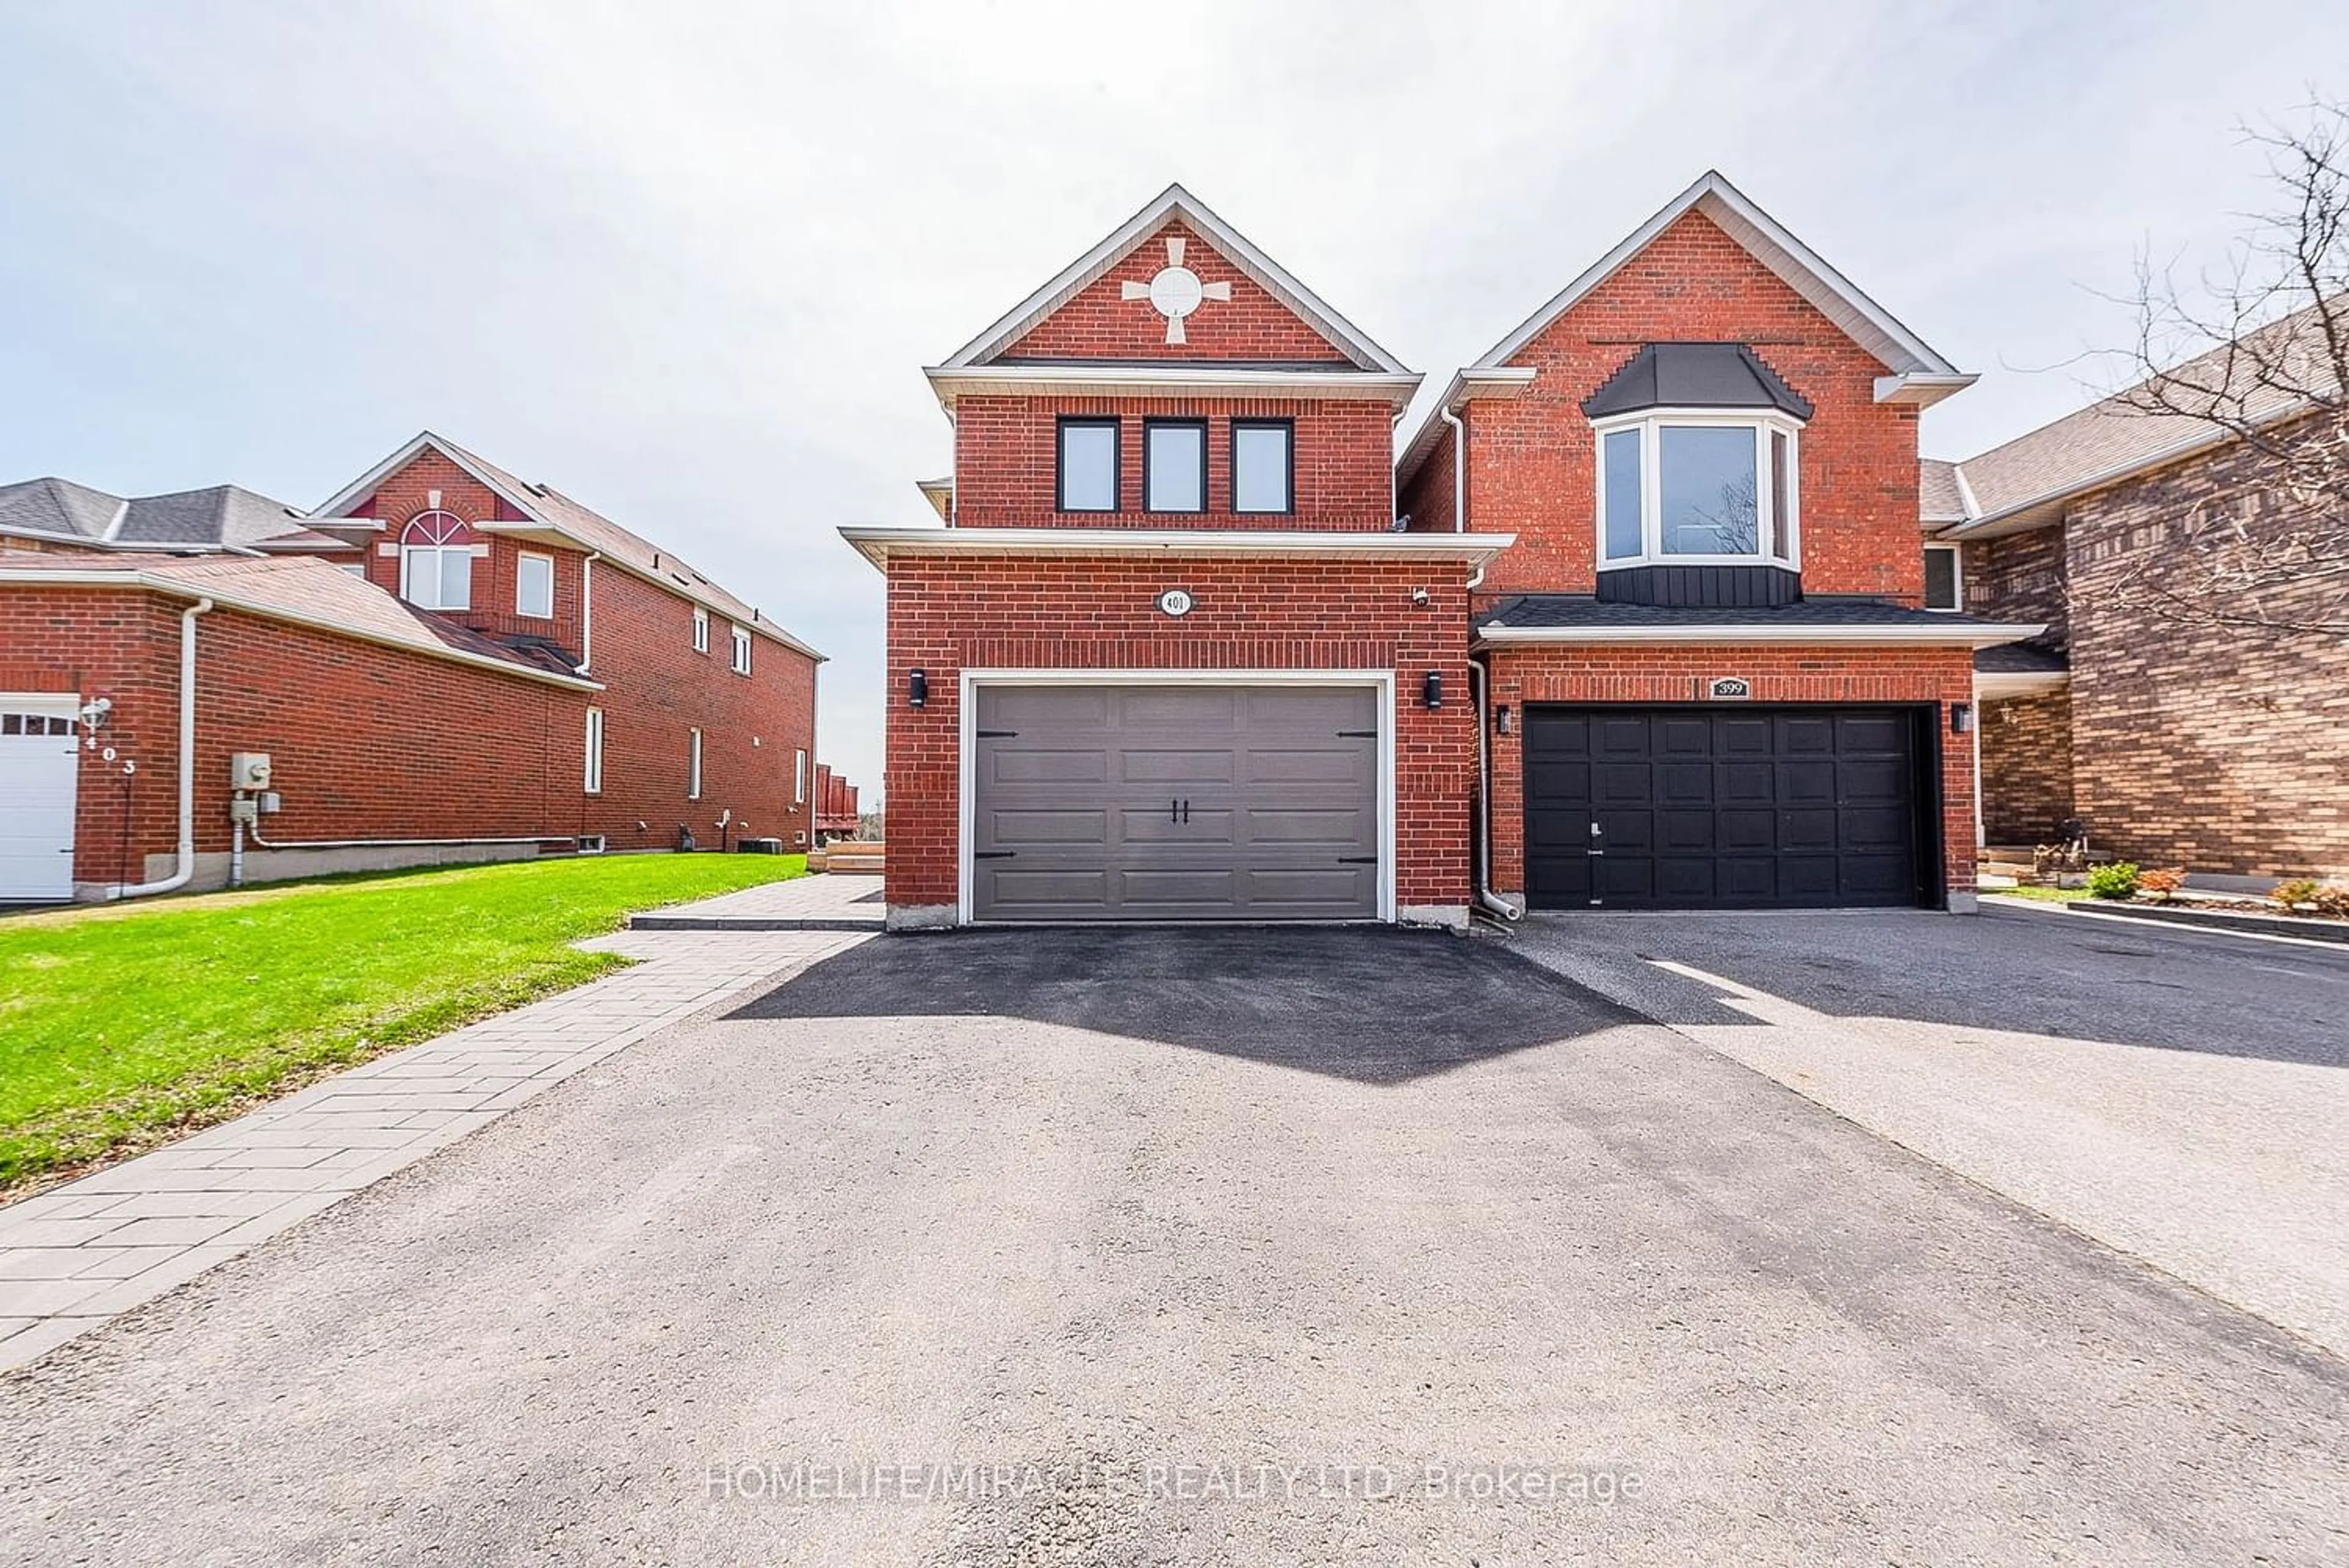 Home with brick exterior material for 401 Jay Cres, Orangeville Ontario L9W 4Z1